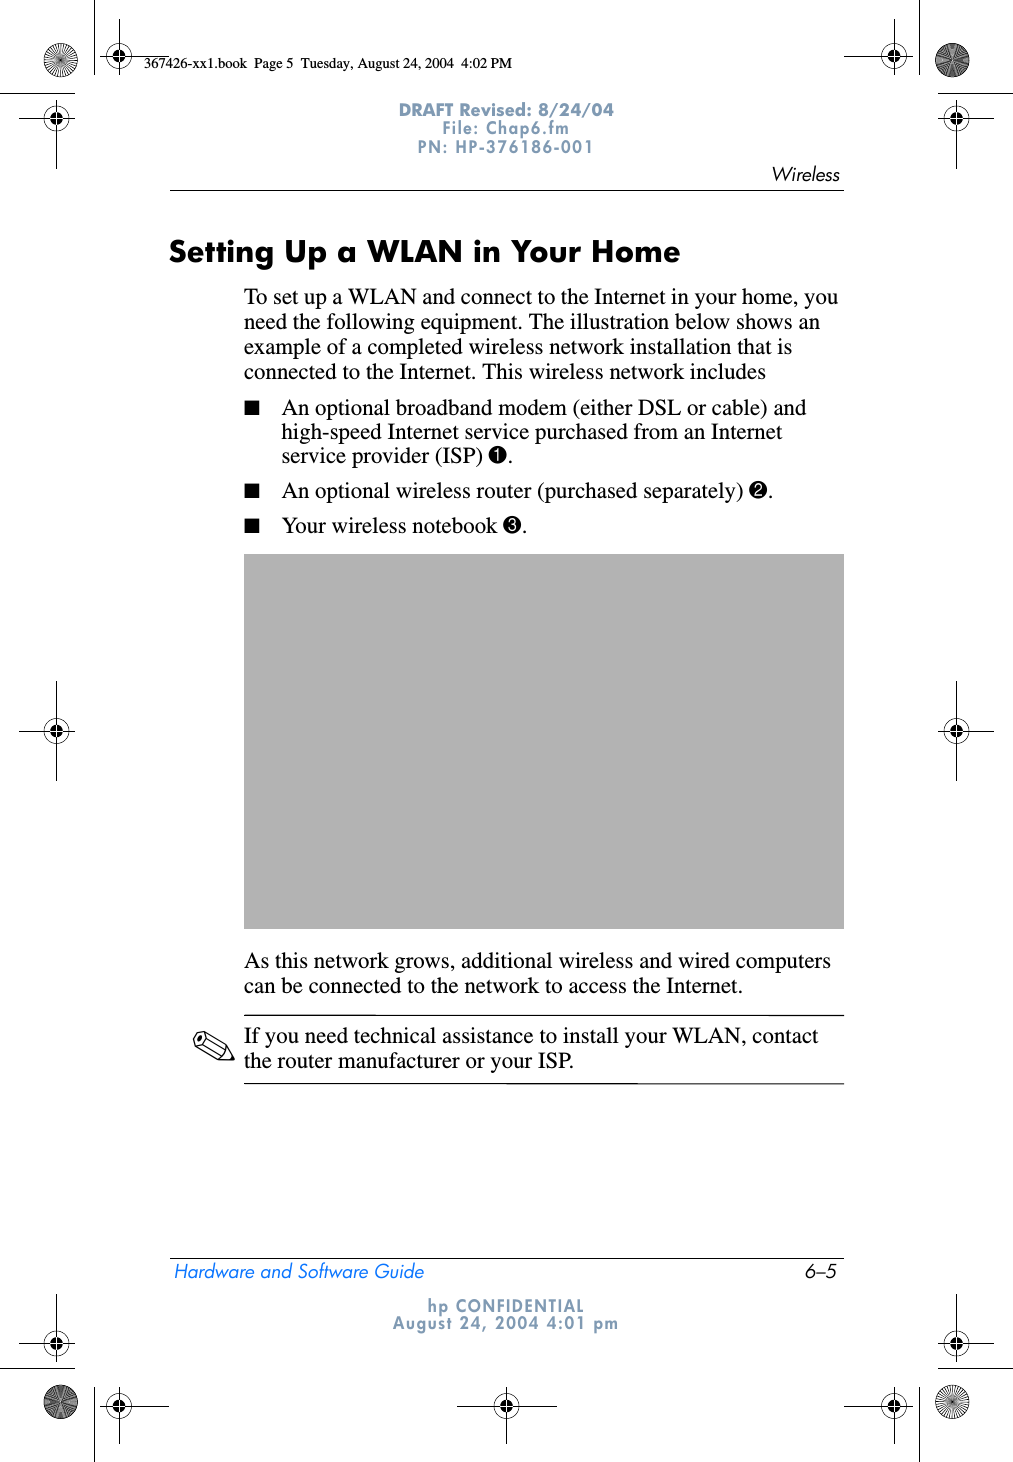 WirelessHardware and Software Guide 6–5DRAFT Revised: 8/24/04File: Chap6.fm PN: HP-376186-001 hp CONFIDENTIALAugust 24, 2004 4:01 pmSetting Up a WLAN in Your HomeTo set up a WLAN and connect to the Internet in your home, you need the following equipment. The illustration below shows an example of a completed wireless network installation that is connected to the Internet. This wireless network includes■An optional broadband modem (either DSL or cable) and high-speed Internet service purchased from an Internet service provider (ISP) 1.■An optional wireless router (purchased separately) 2.■Your wireless notebook 3.As this network grows, additional wireless and wired computers can be connected to the network to access the Internet.✎If you need technical assistance to install your WLAN, contact the router manufacturer or your ISP.367426-xx1.book  Page 5  Tuesday, August 24, 2004  4:02 PM